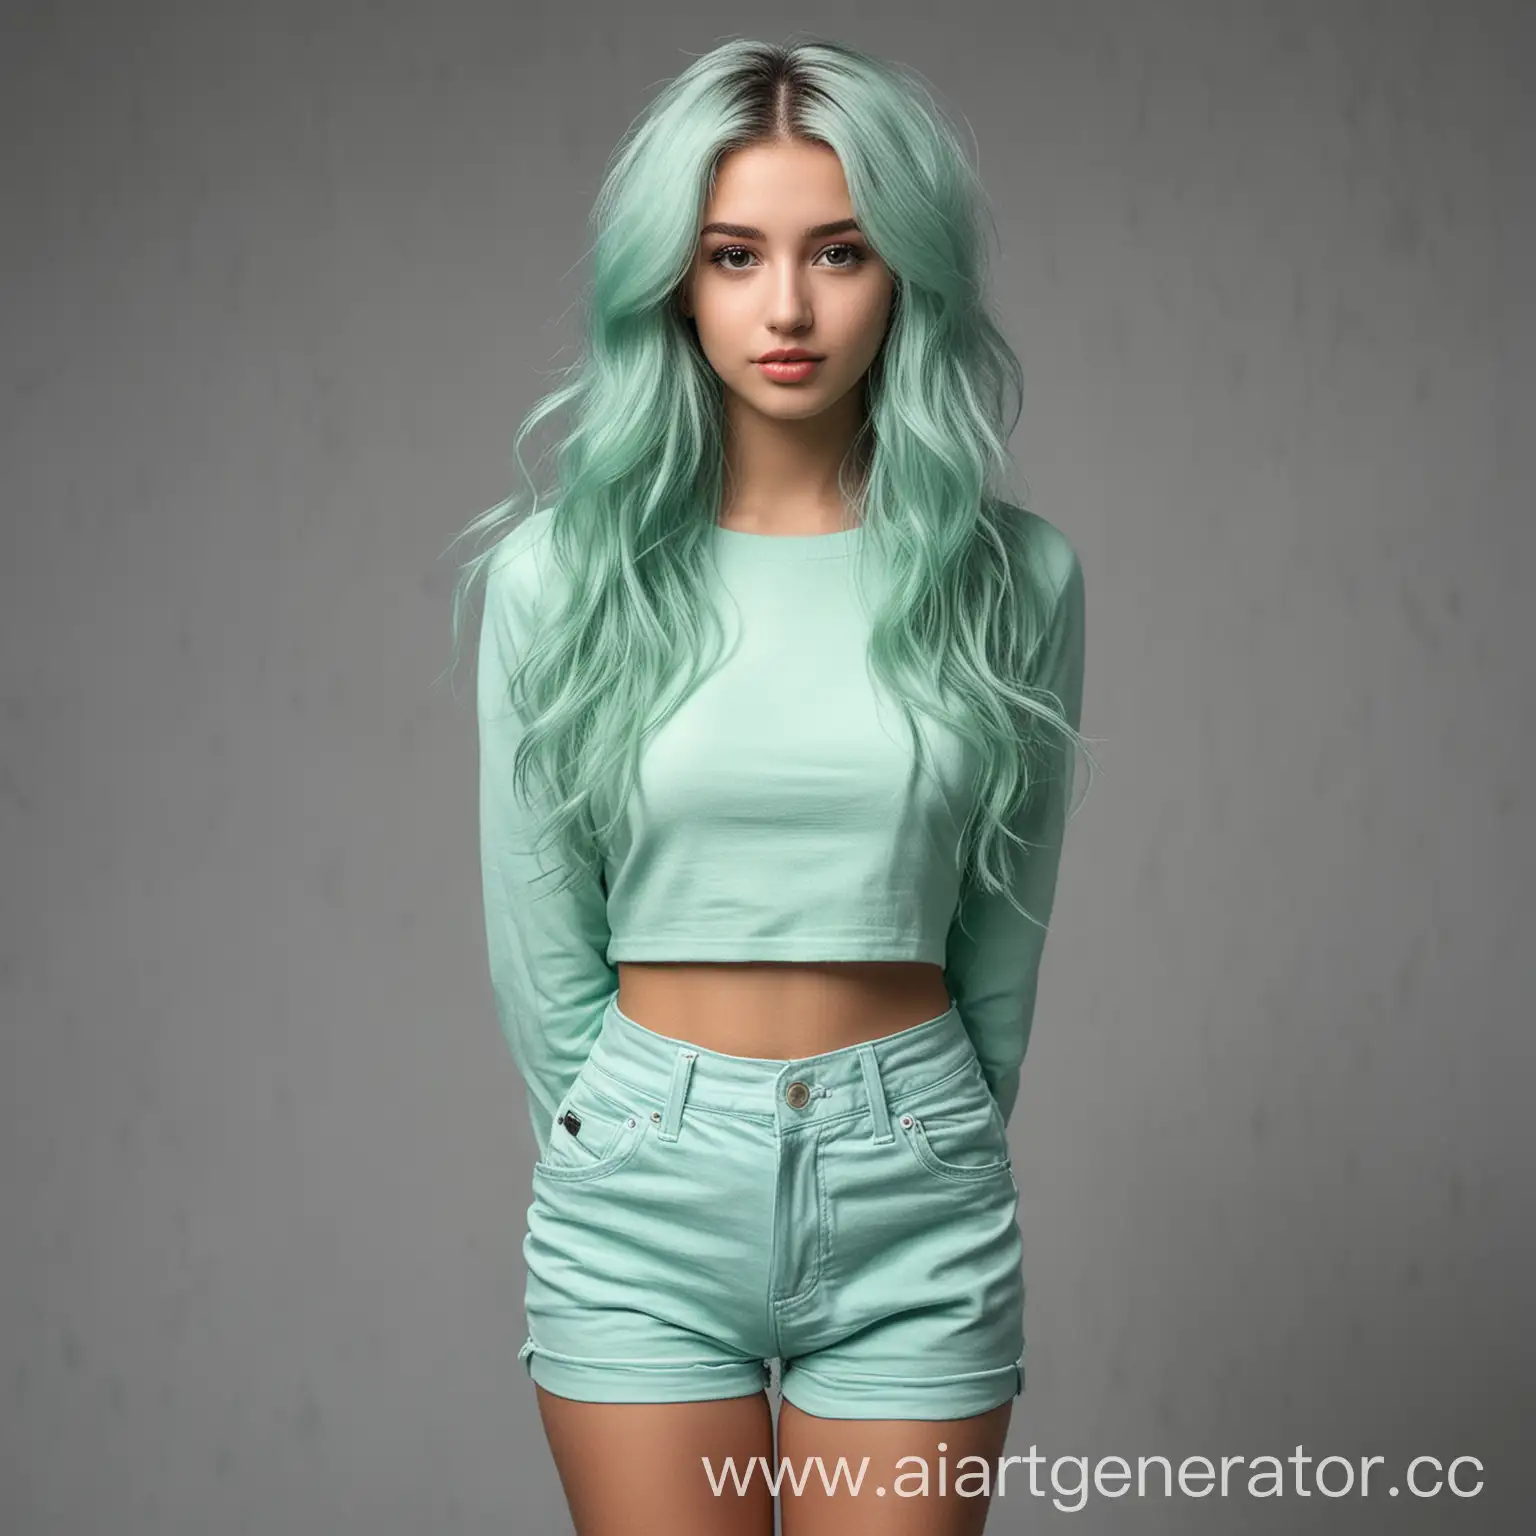 Young-Woman-with-WaistLength-MintColored-Hair